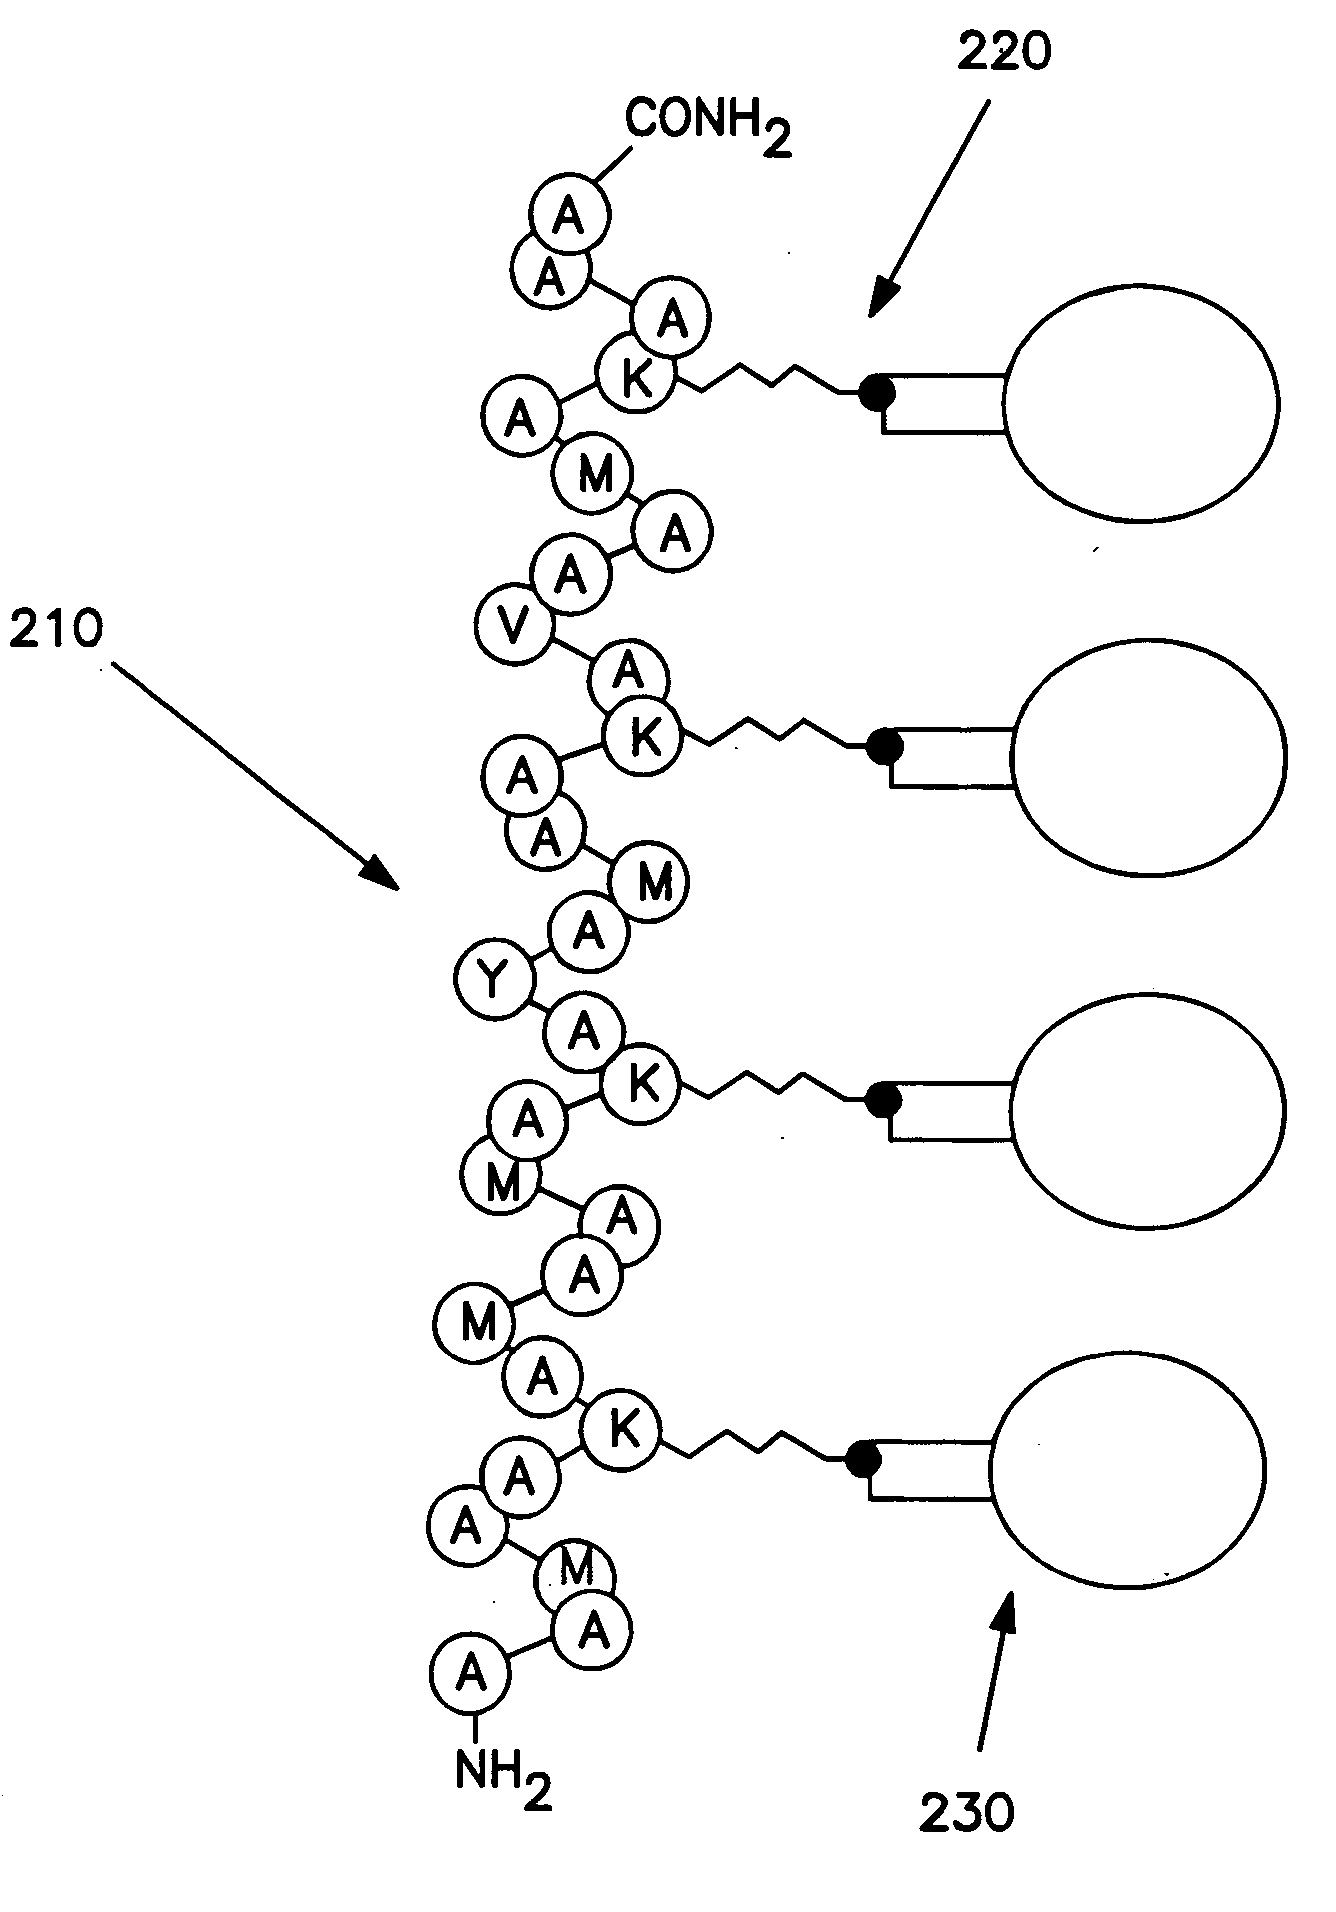 Methods of producing carbon nanotubes using peptide or nucleic acid micropatterning